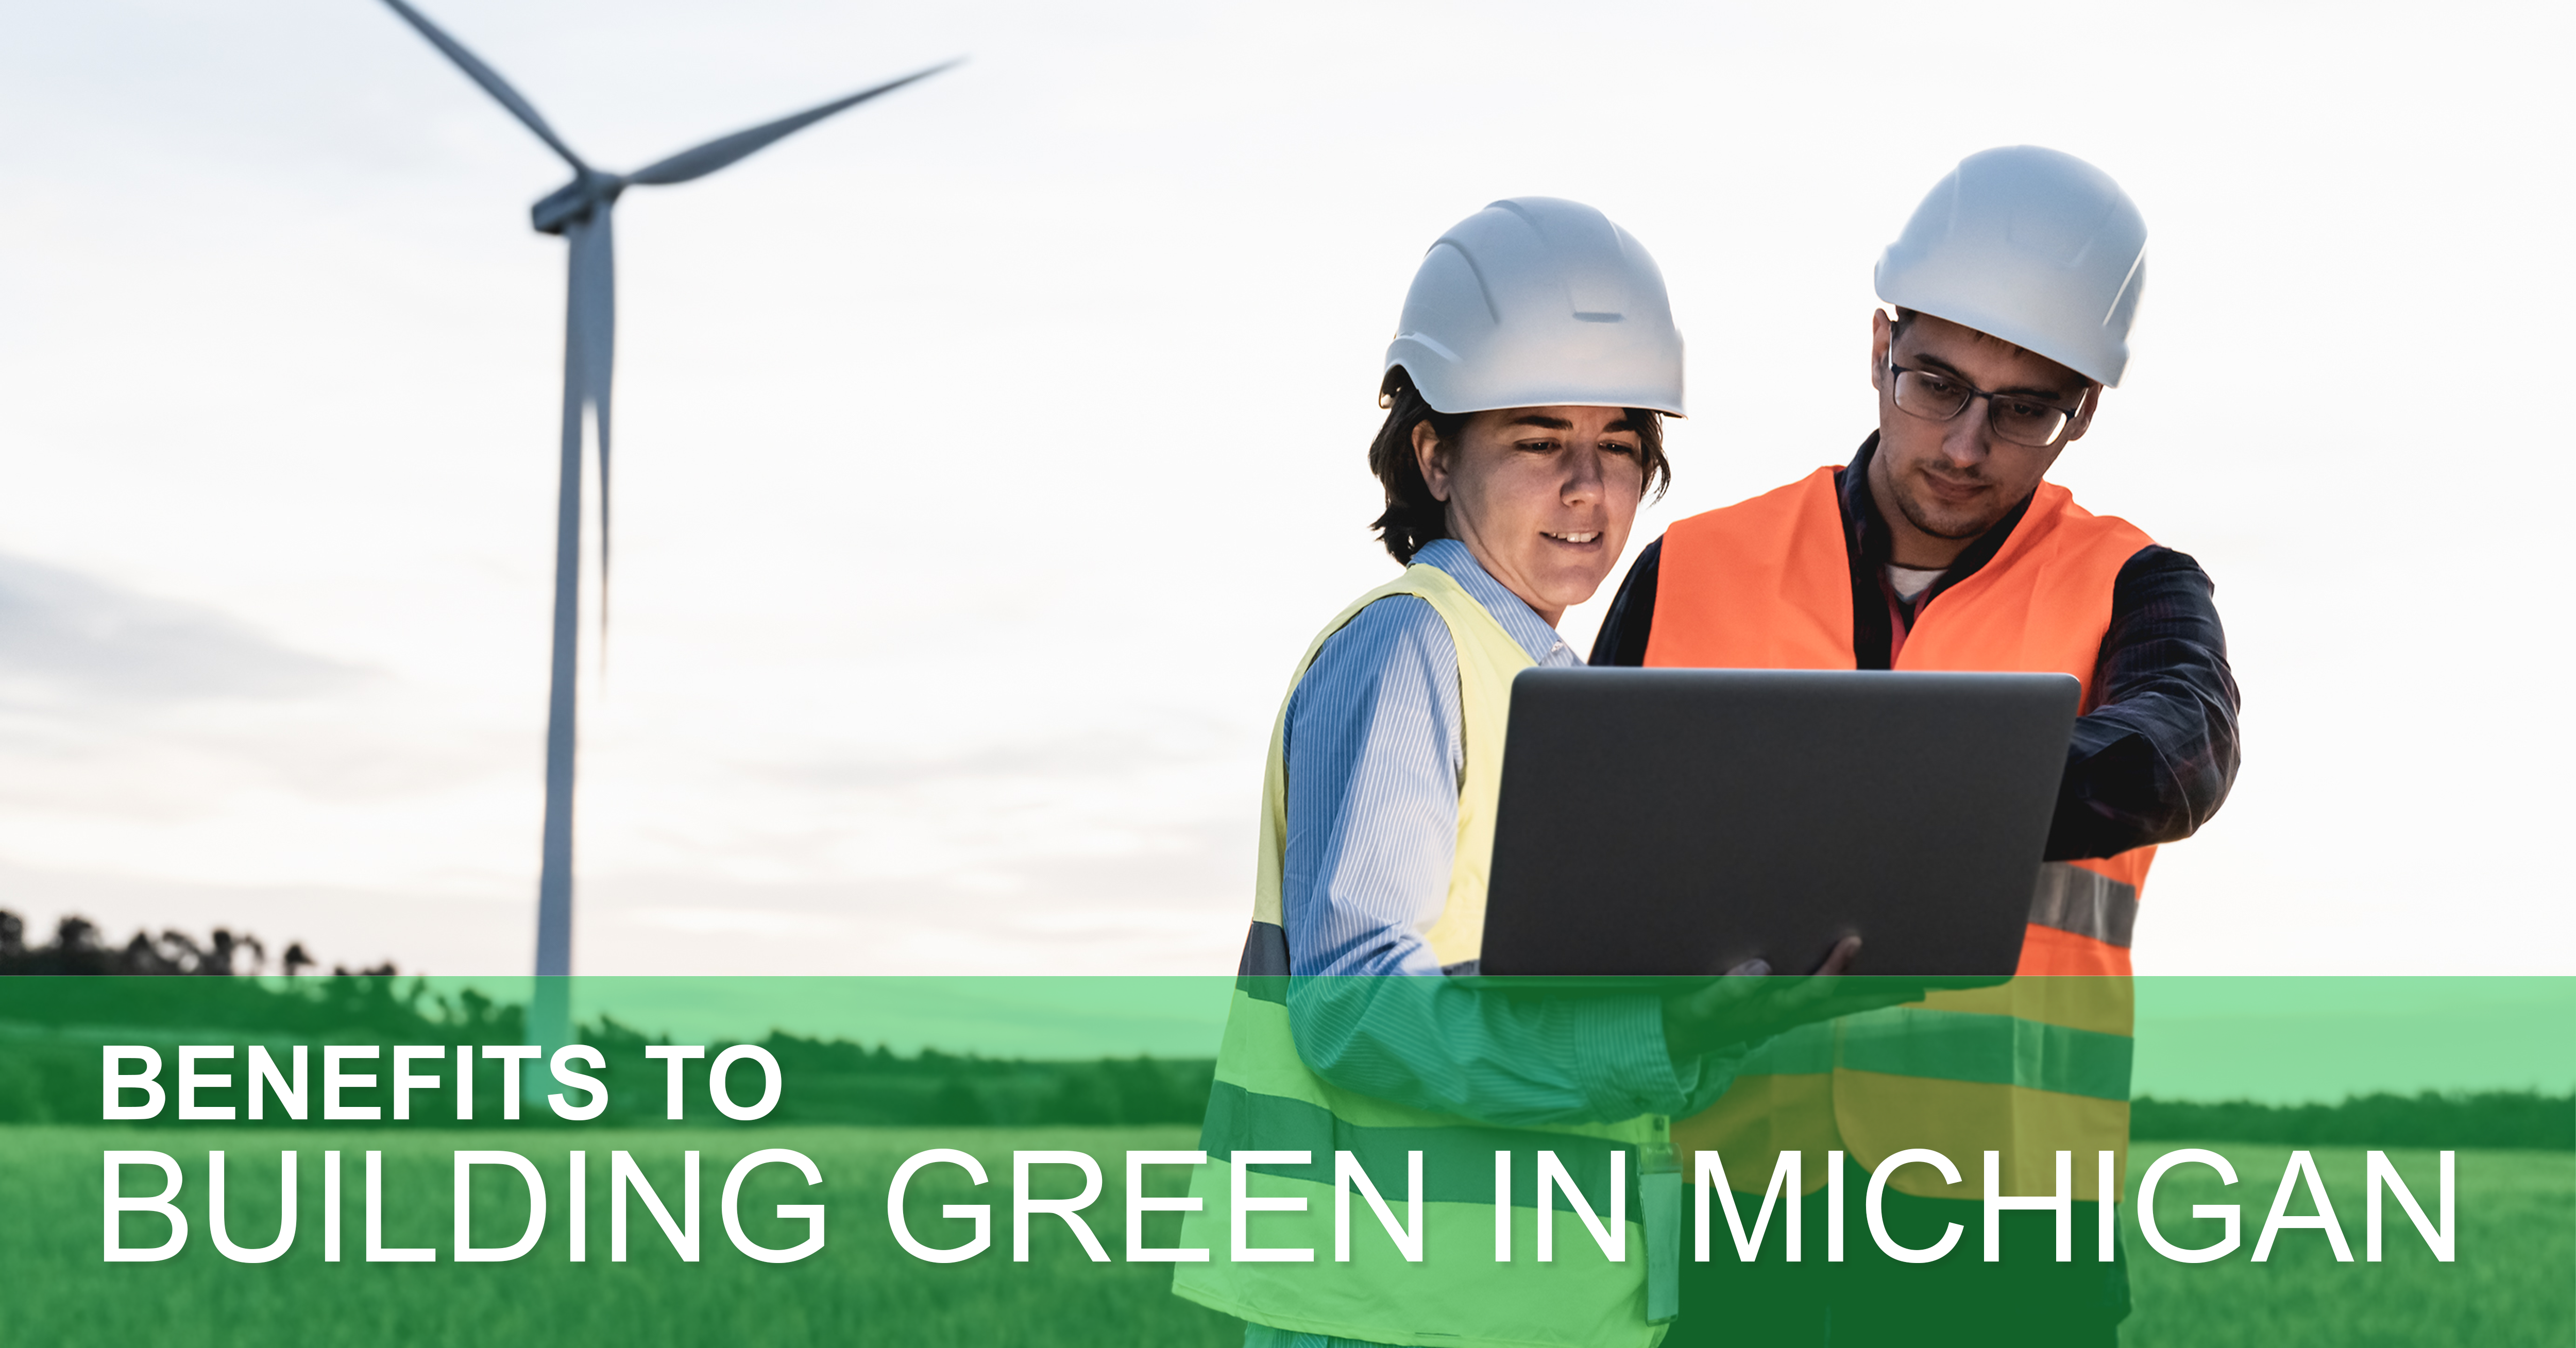 Benefits to Building Green in Michigan